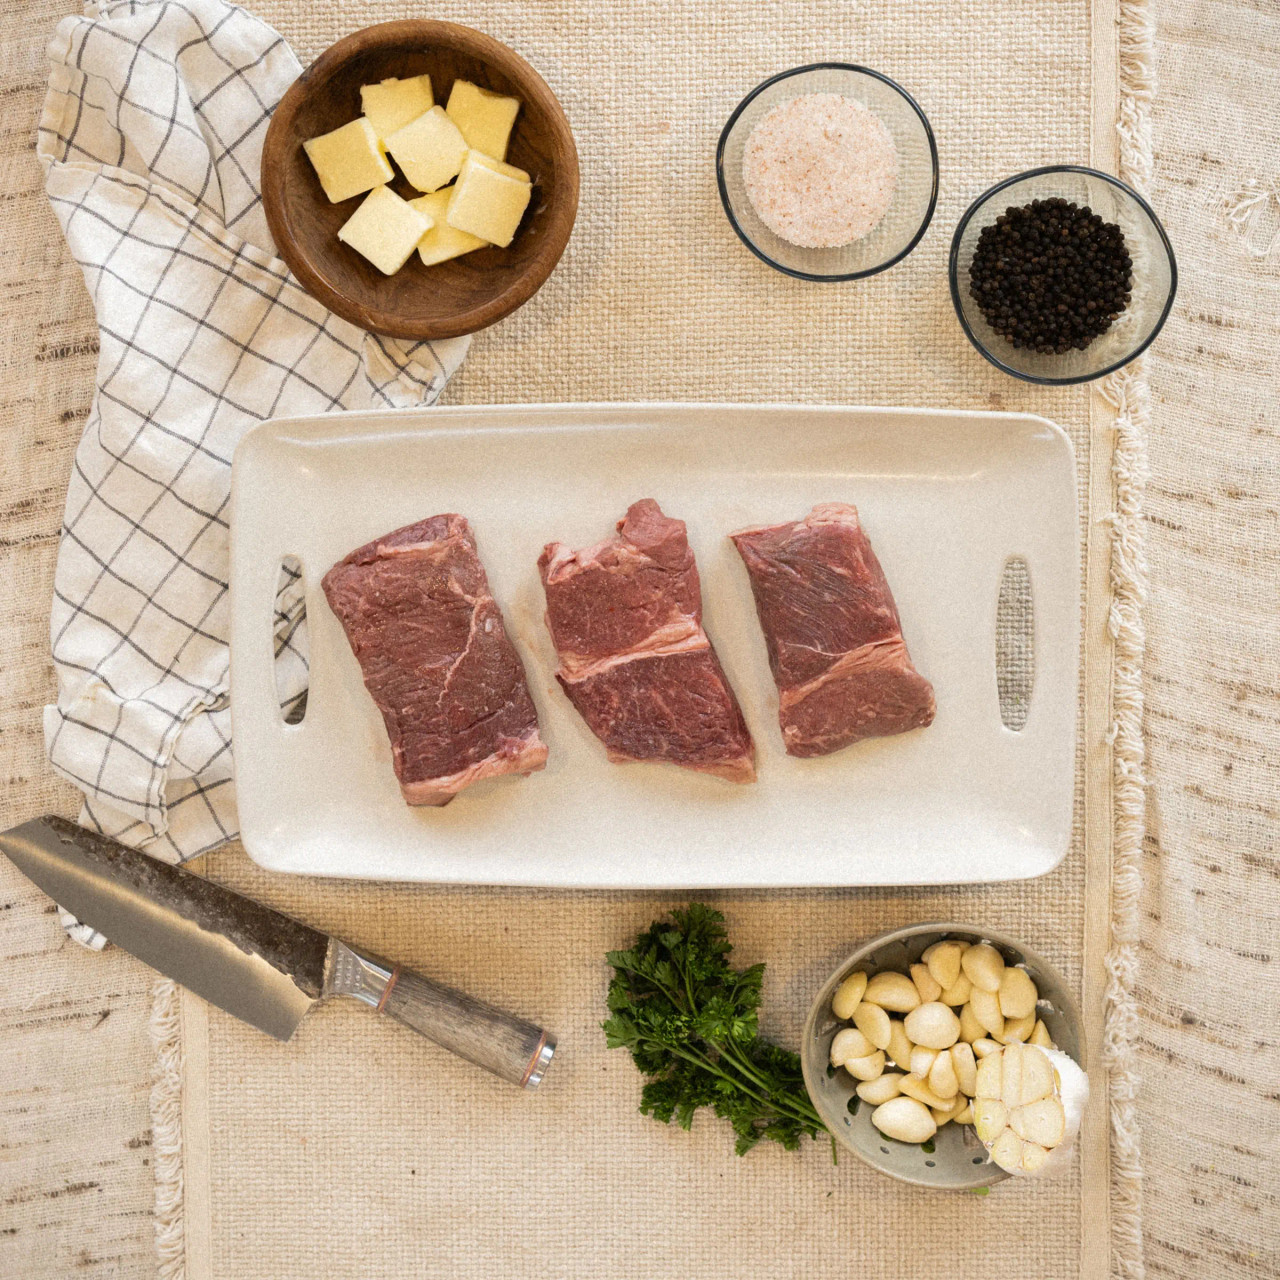 Hand cut top-sirloin steak with herbs on the side, locally sourced and recipe ready.